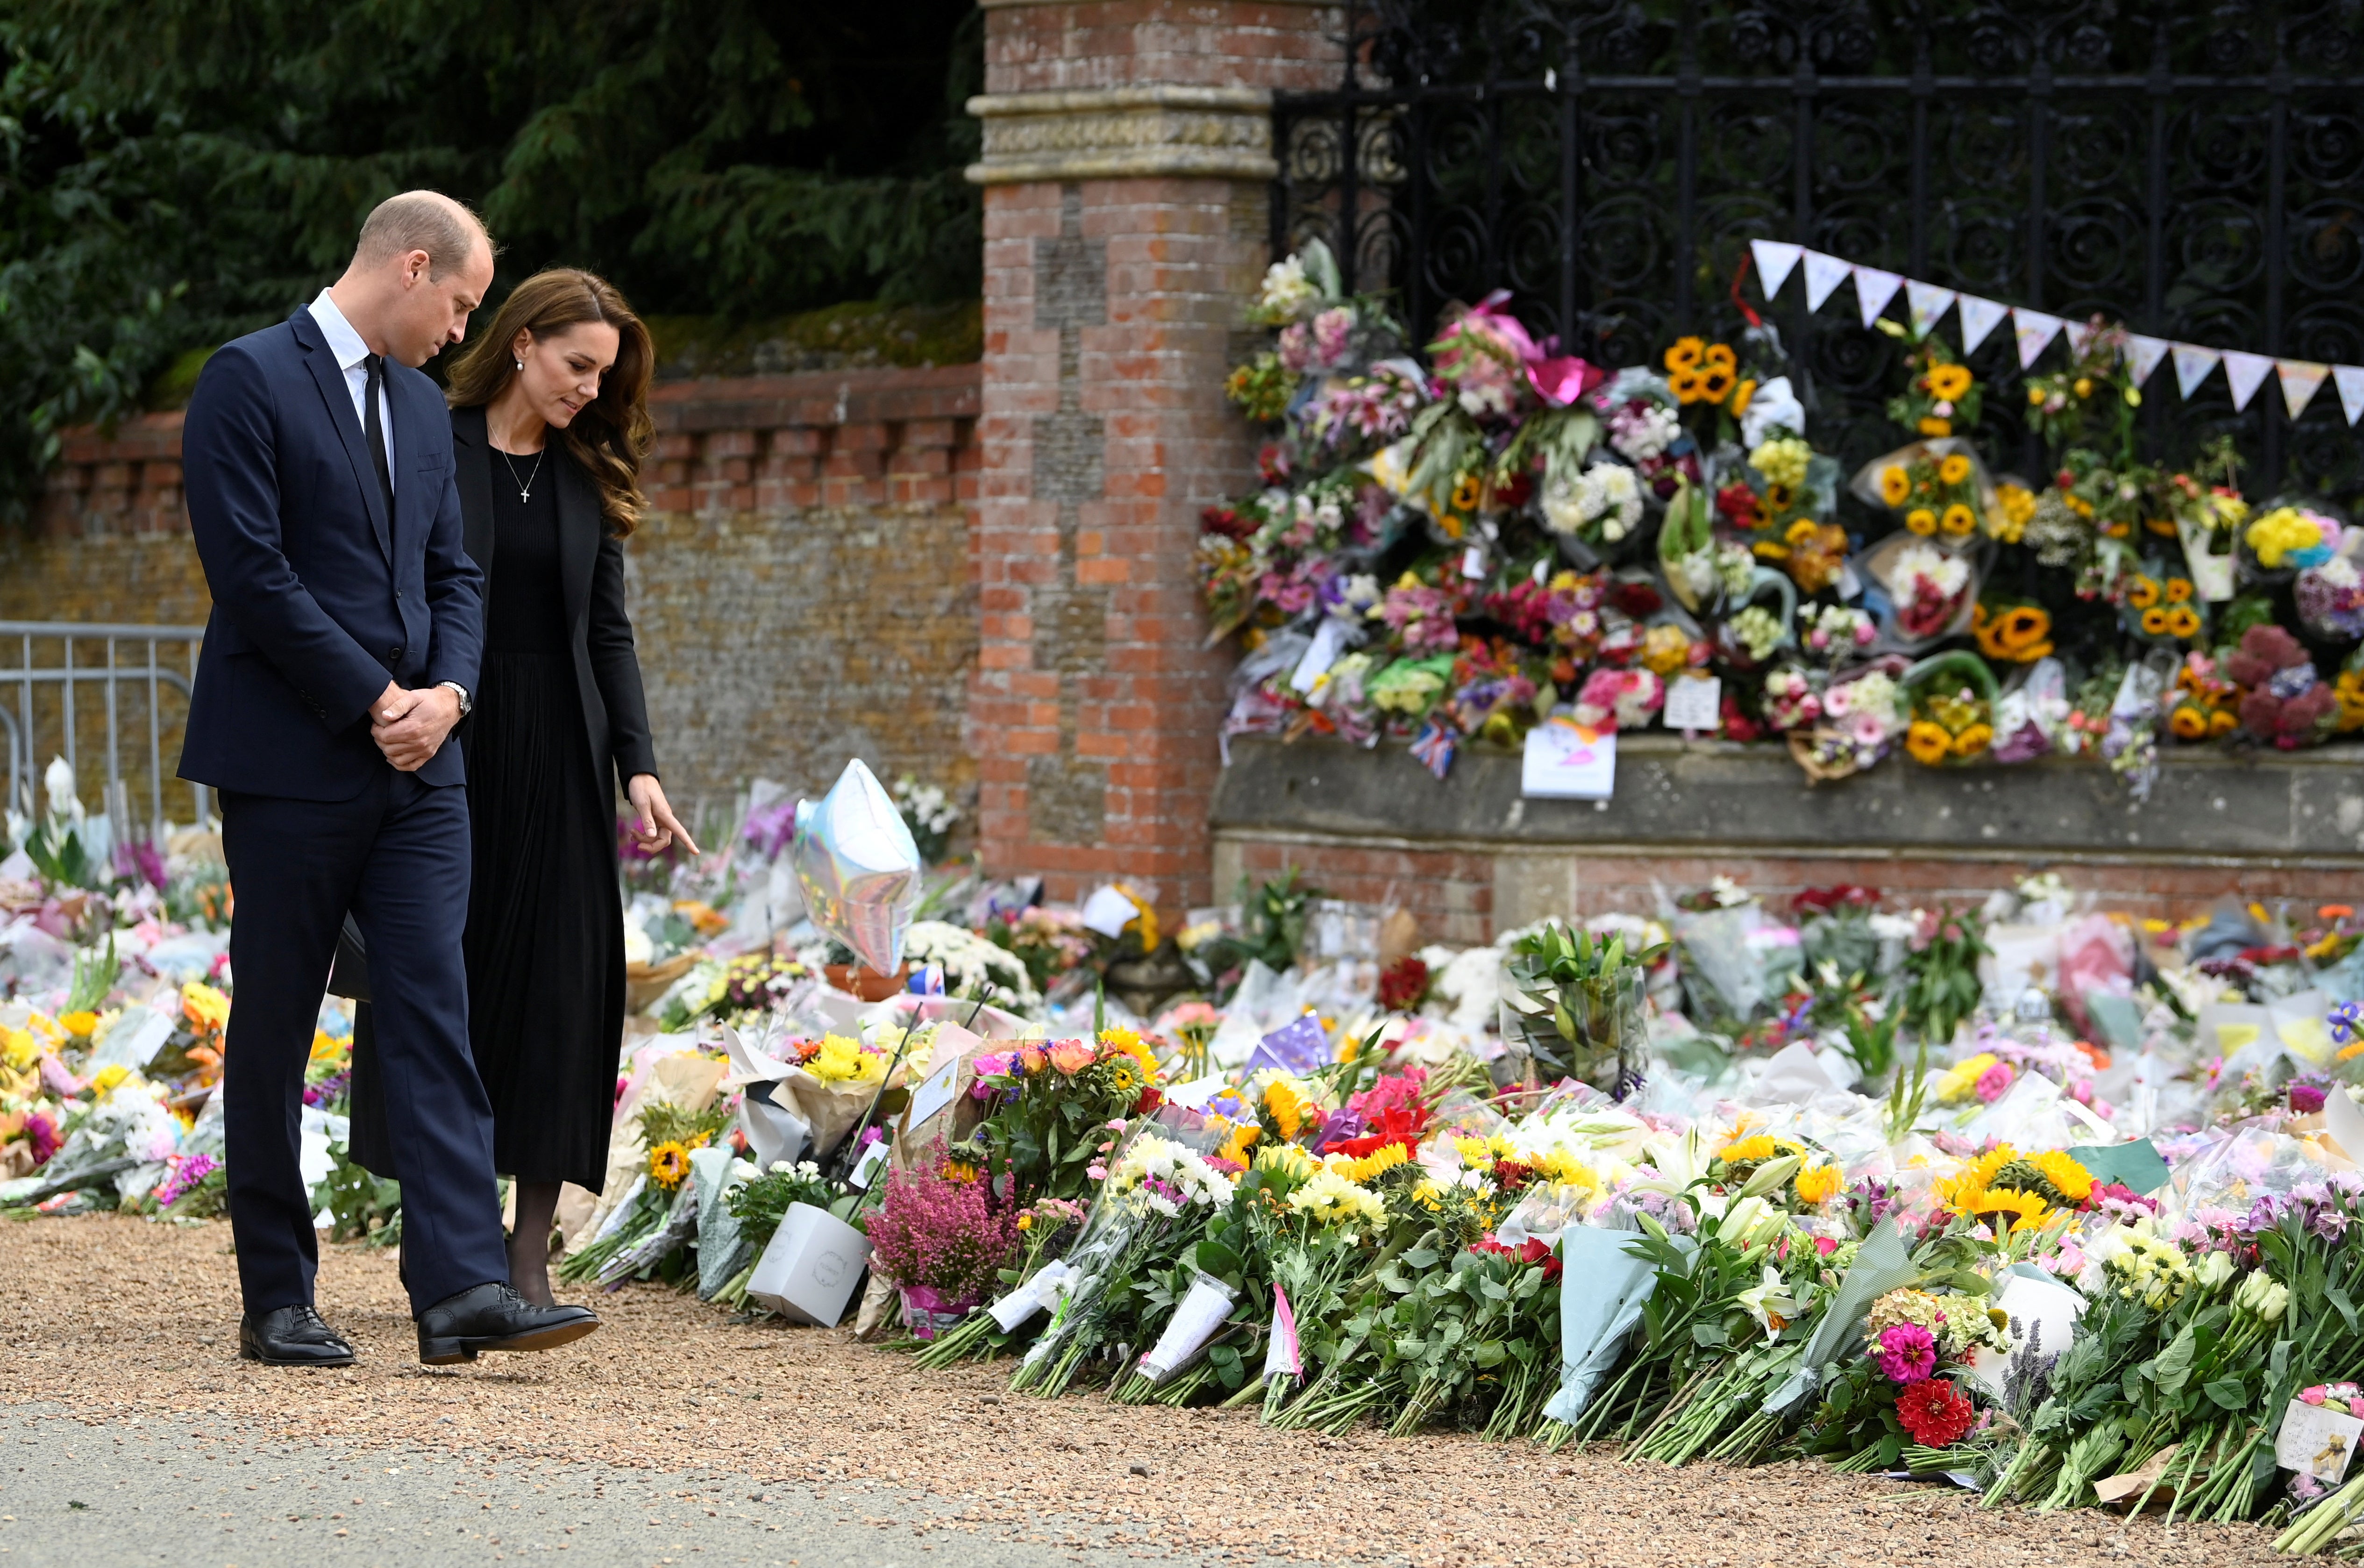 The Prince and Princess of Wales view the floral tributes (Toby Melville/PA)